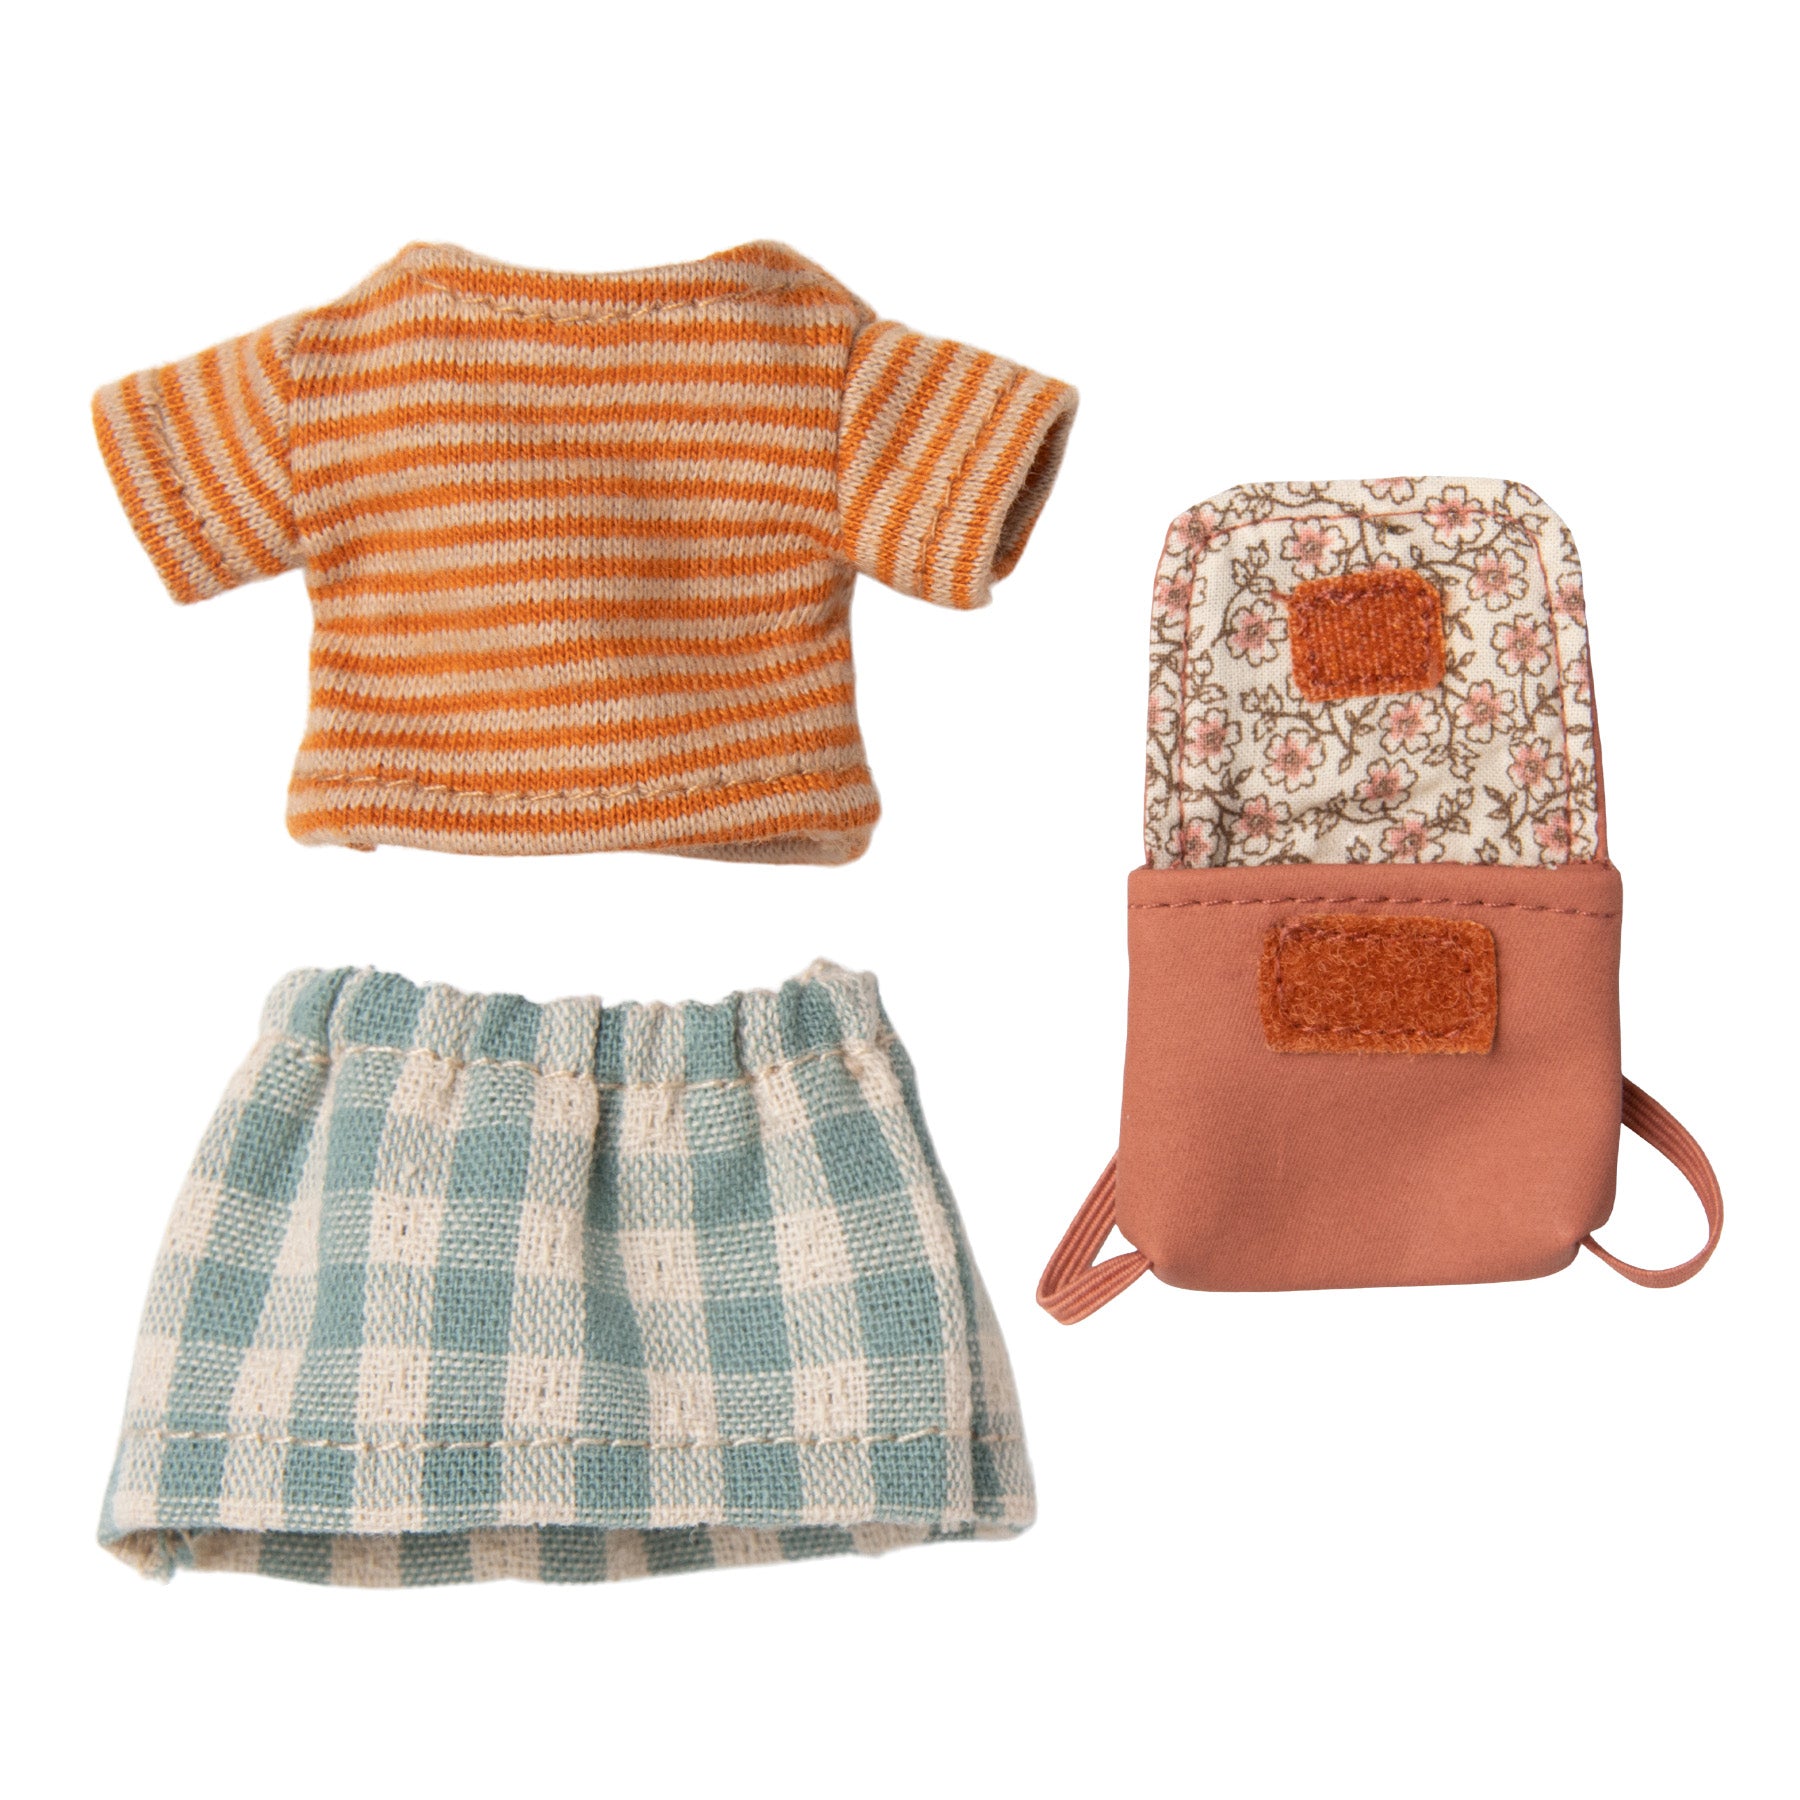 maileg big sister accessories, including a orange stripe jumper, check shirt and pink bag